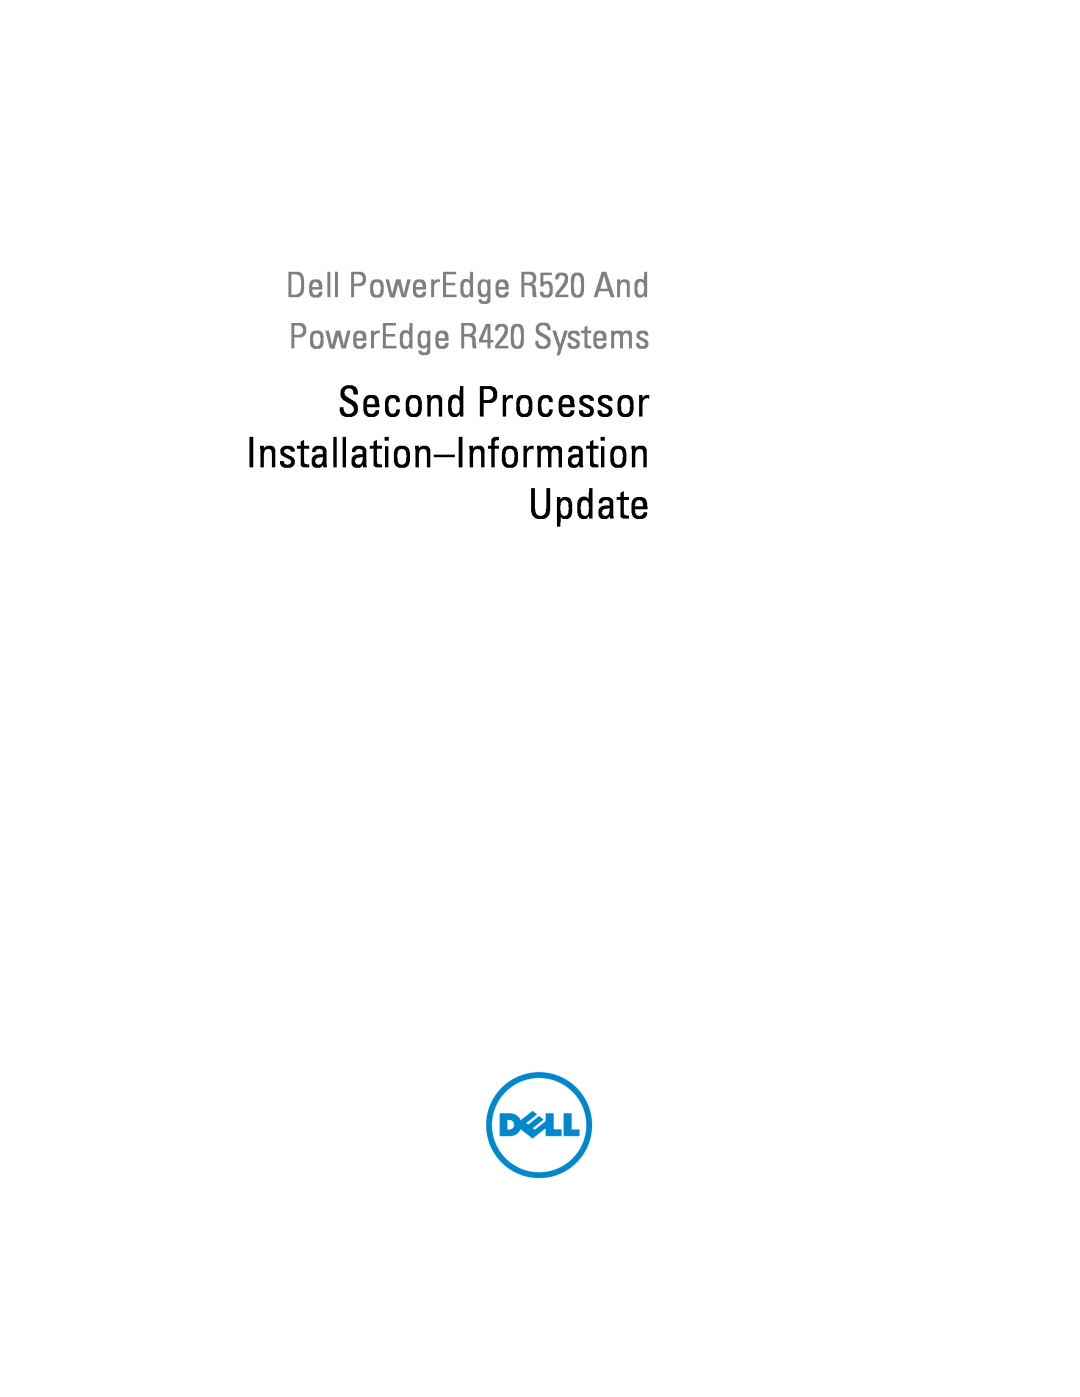 Dell manual Second Processor Installation-Information Update, Dell PowerEdge R520 And PowerEdge R420 Systems 